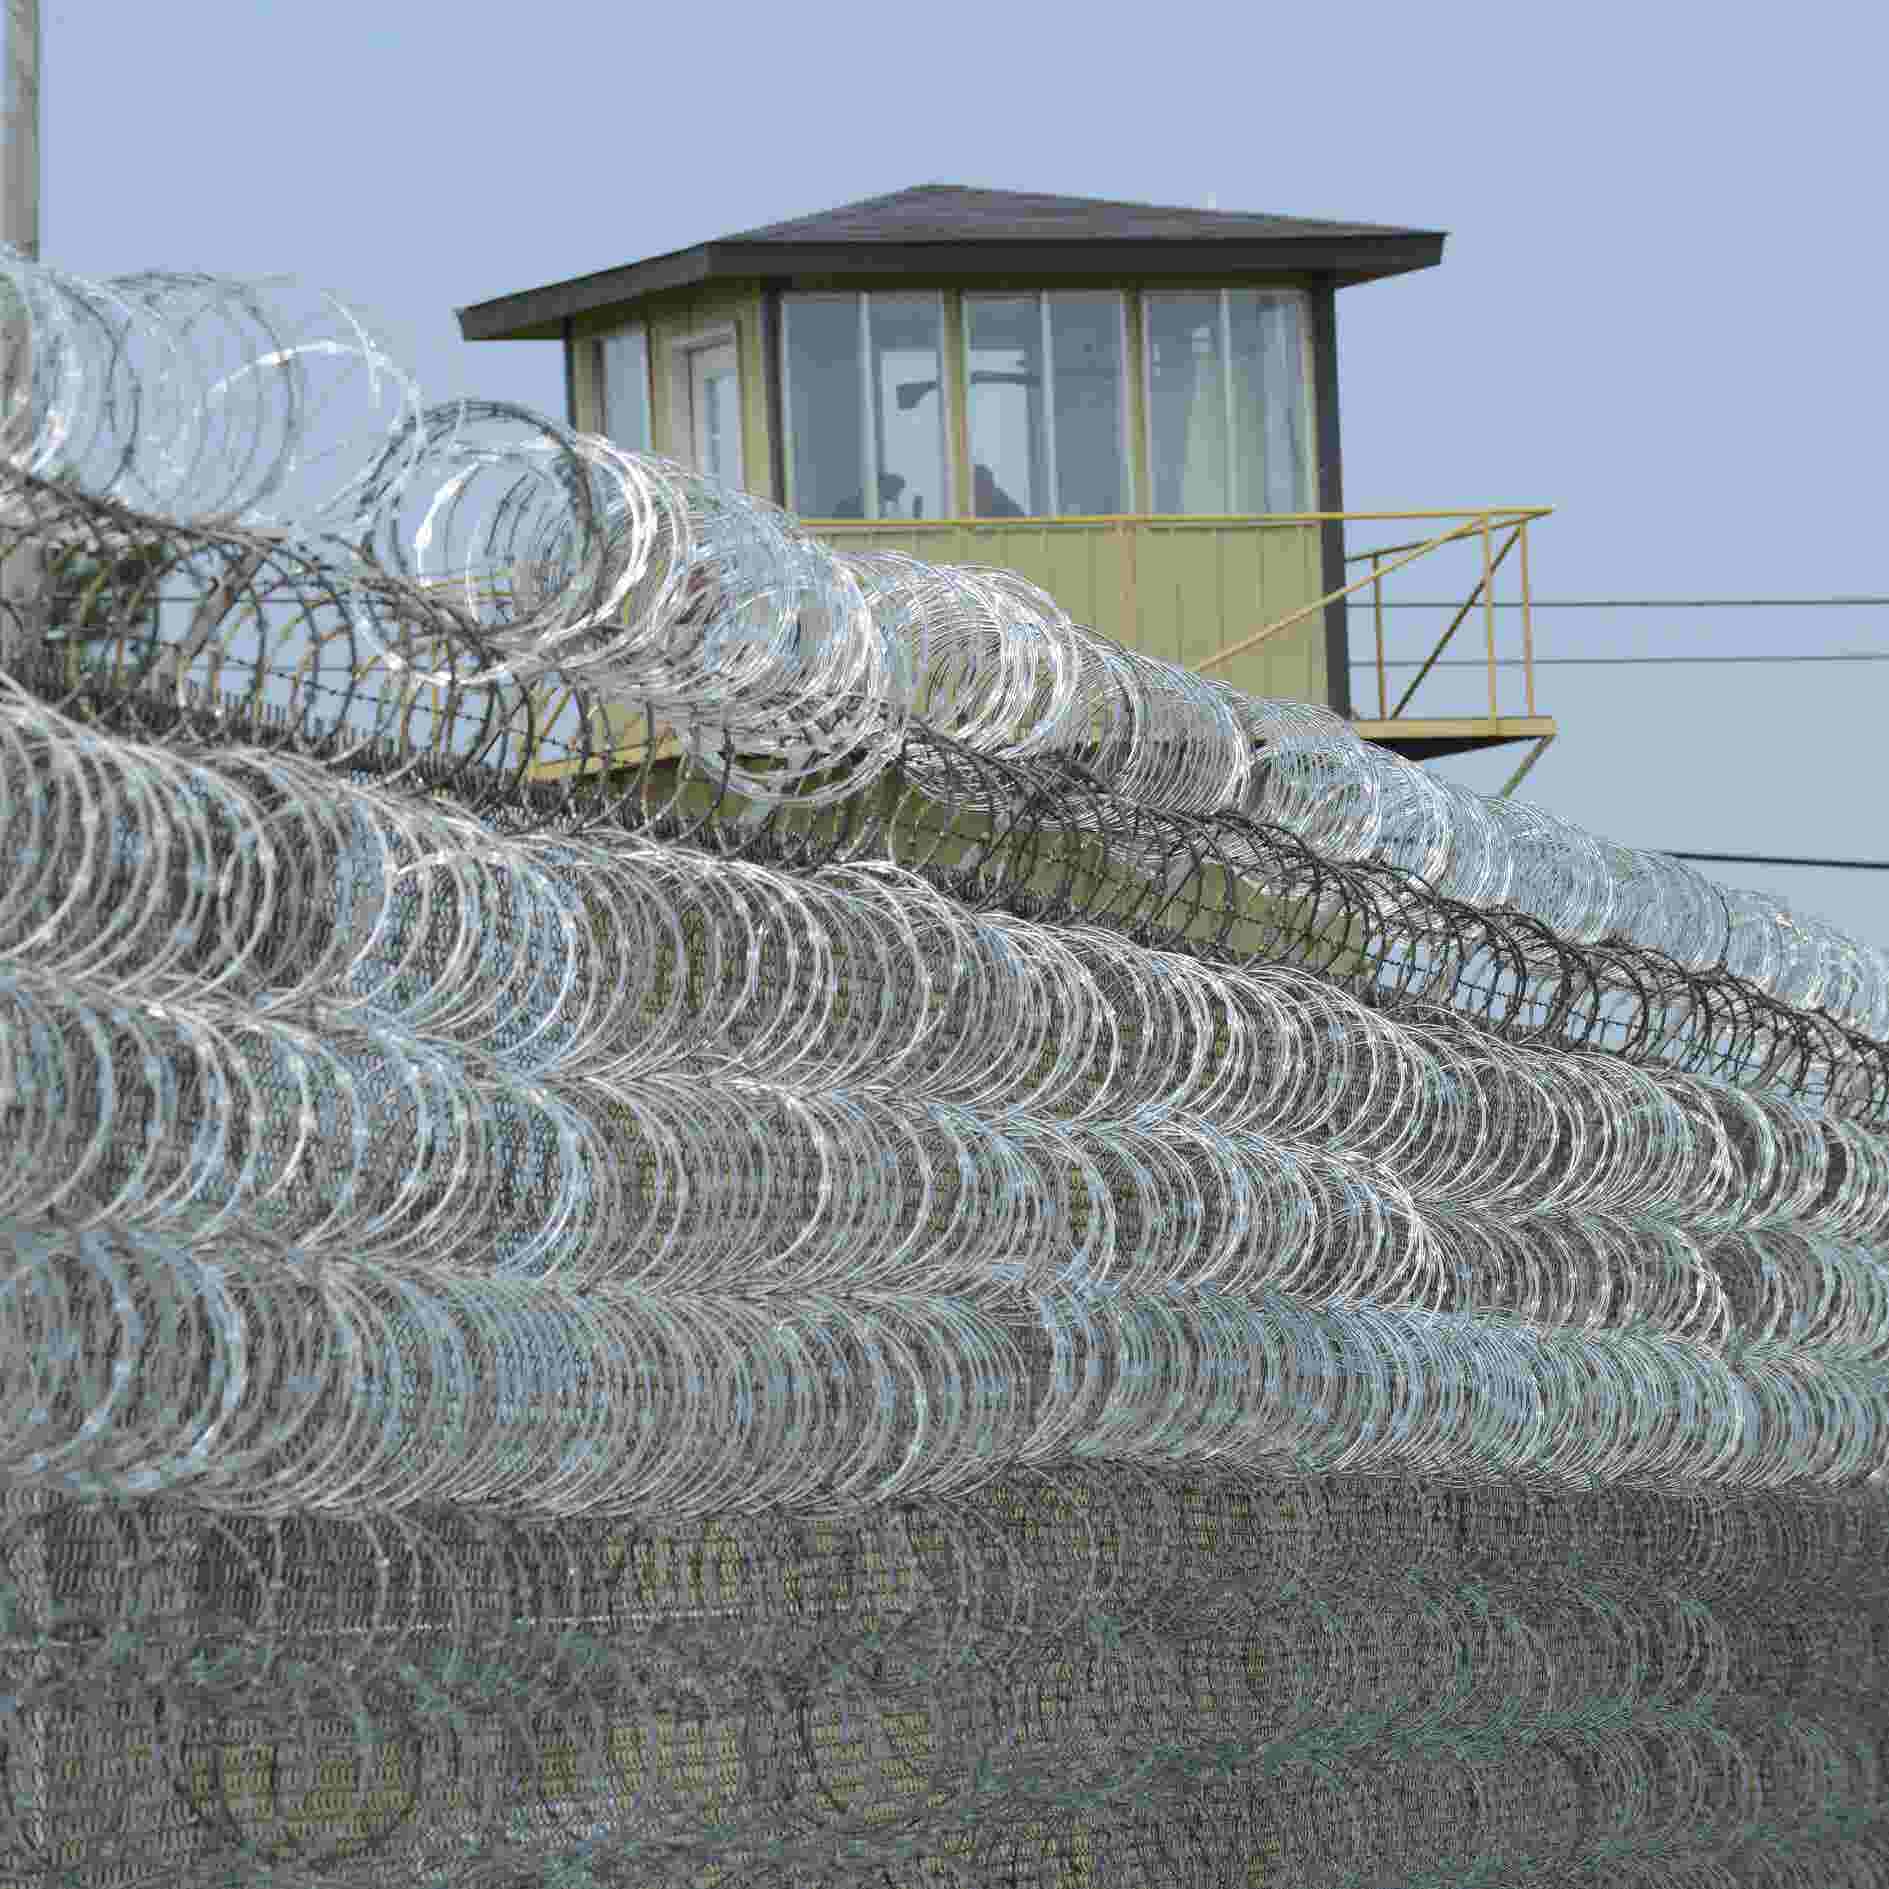 Are Alabama Prison Conditions Better Months After Scathing